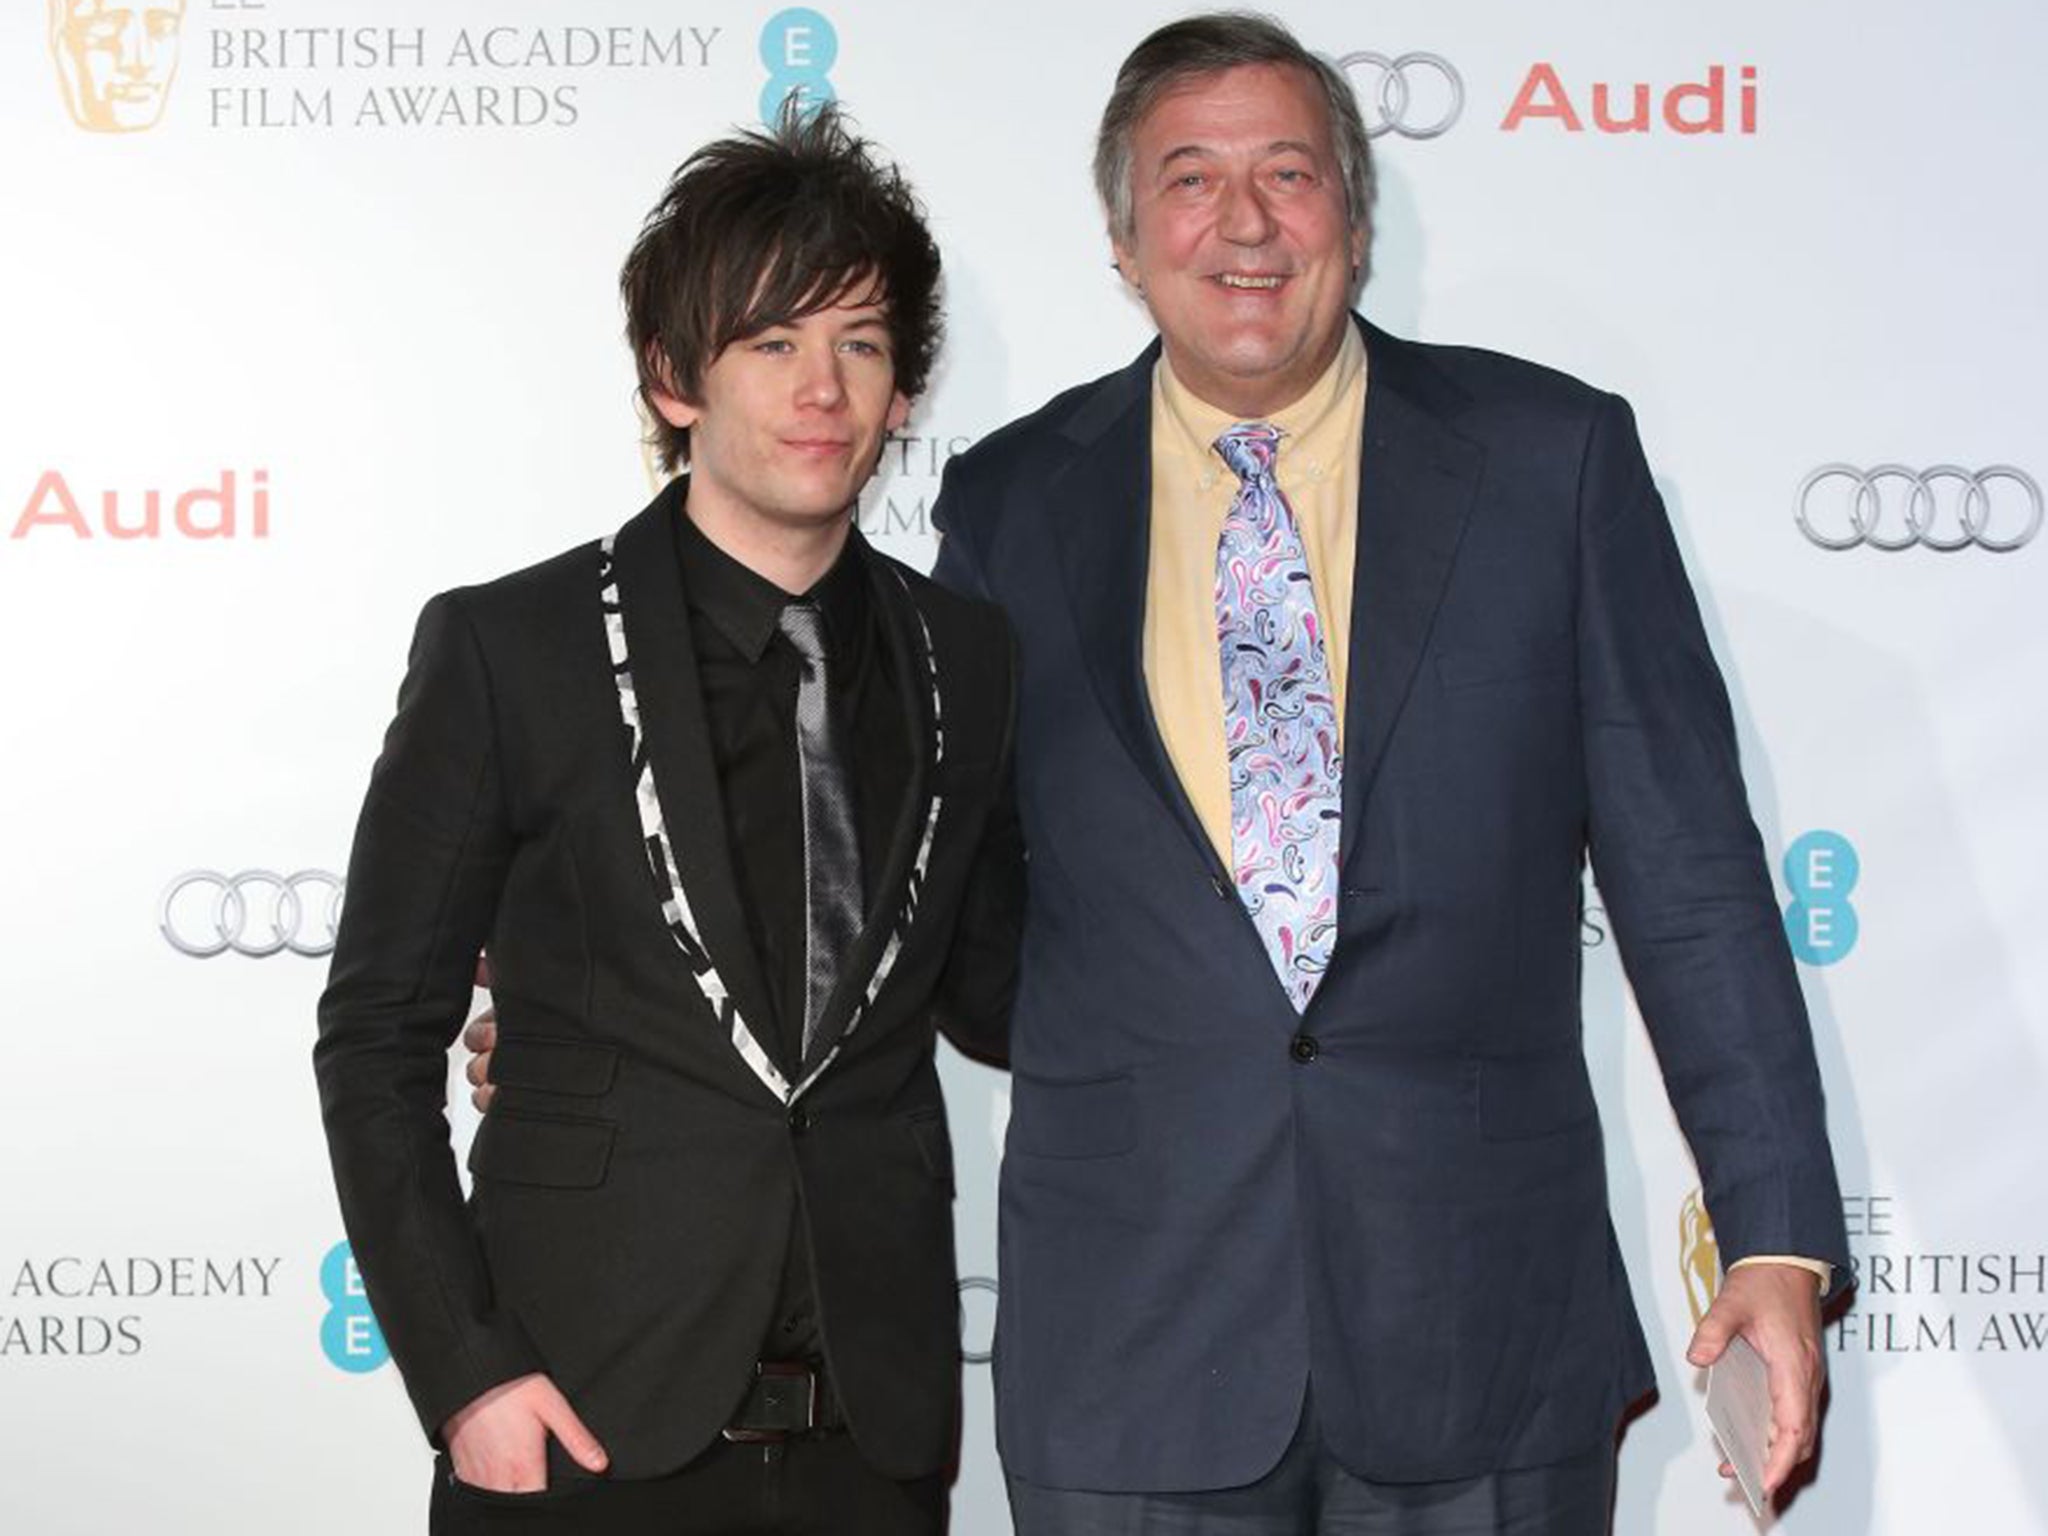 Stephen Fry with his husband Elliot Spencer